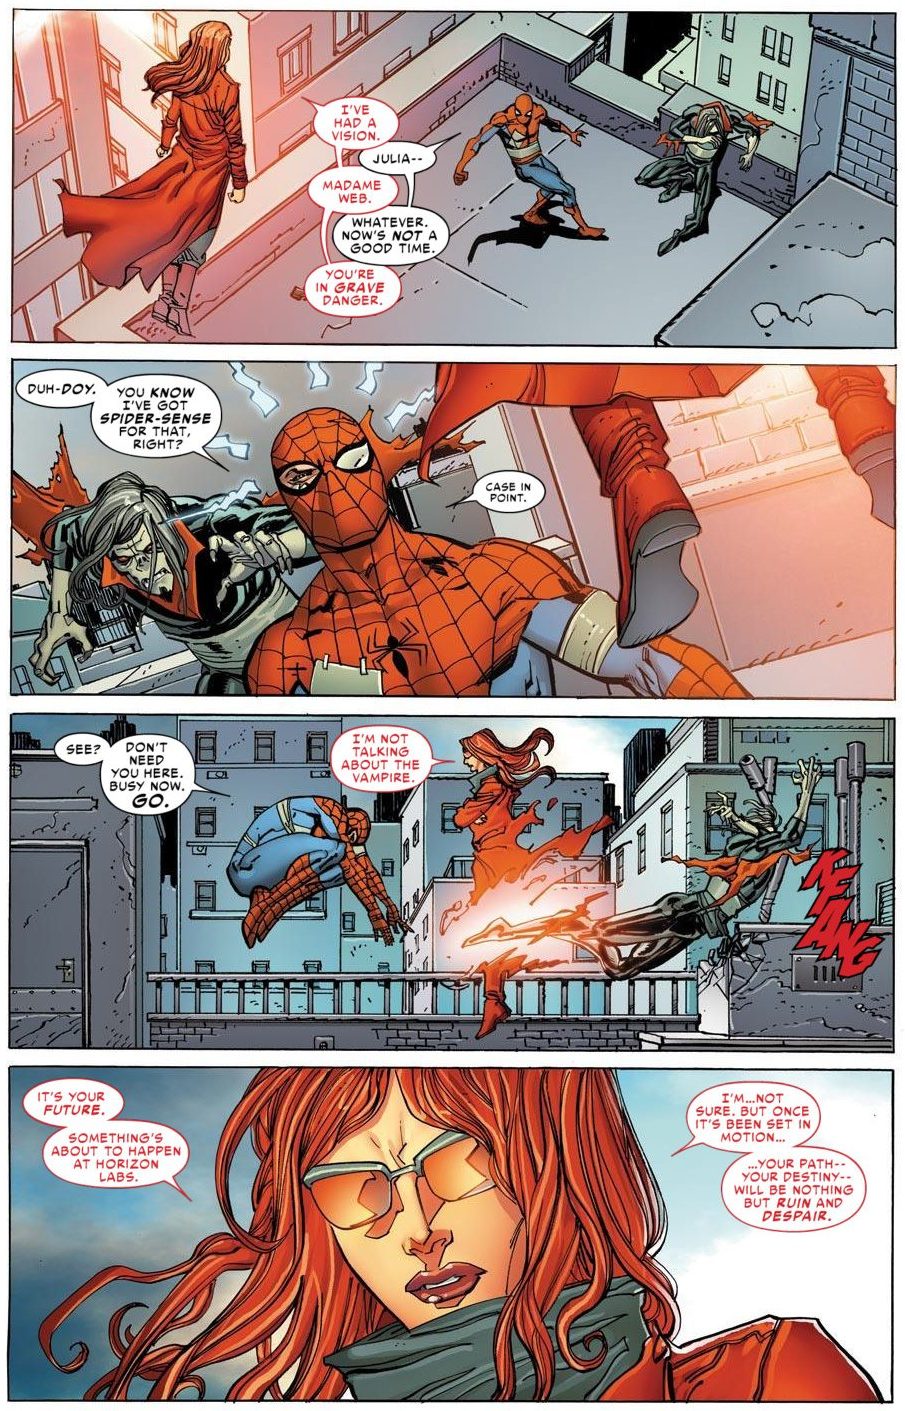 The Julia Carpenter incarnation of Madame Web has a message for Peter Parker in Amazing Spider-Man Vol. 1 #690 "No Turning Back, Part 3: Natural State" (2012), Marvel Comics. Words by Dan Slott, art by Giuseppe Camuncoli, Klaus Janson, Dan Green, Frank D'Armata, and Joe Caramagna.